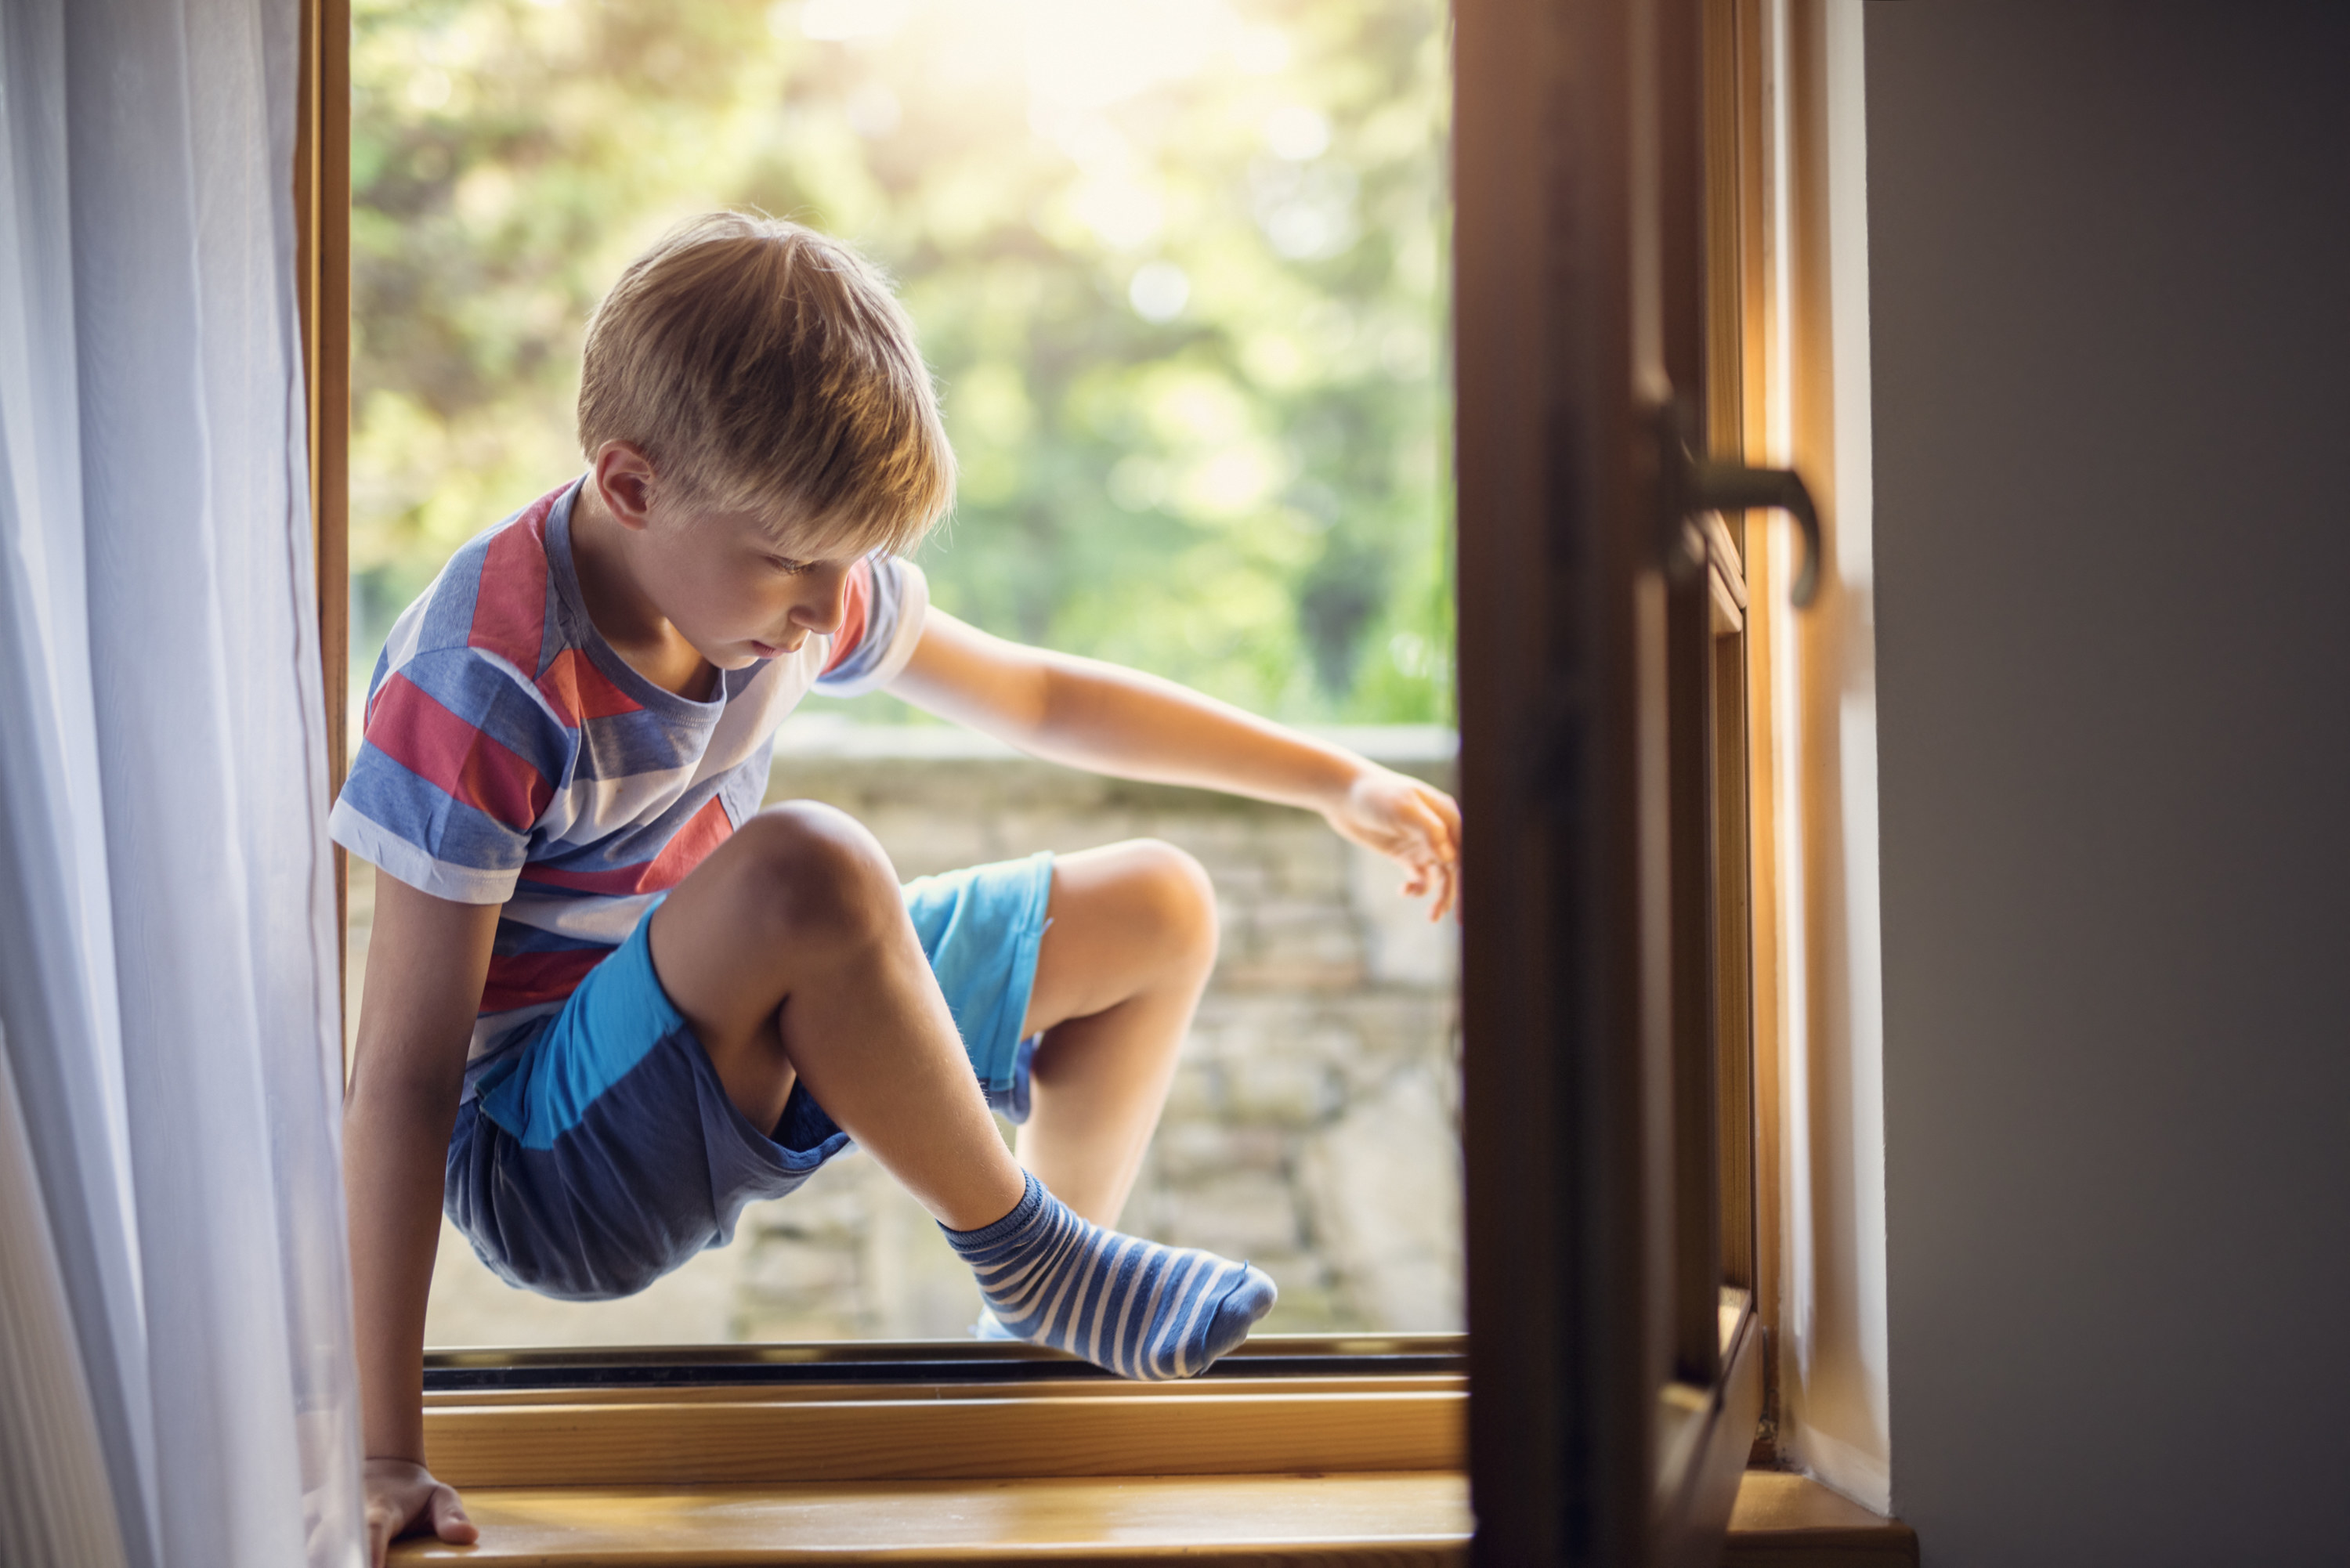 middle-school aged boy crawling into a window after being out of the house